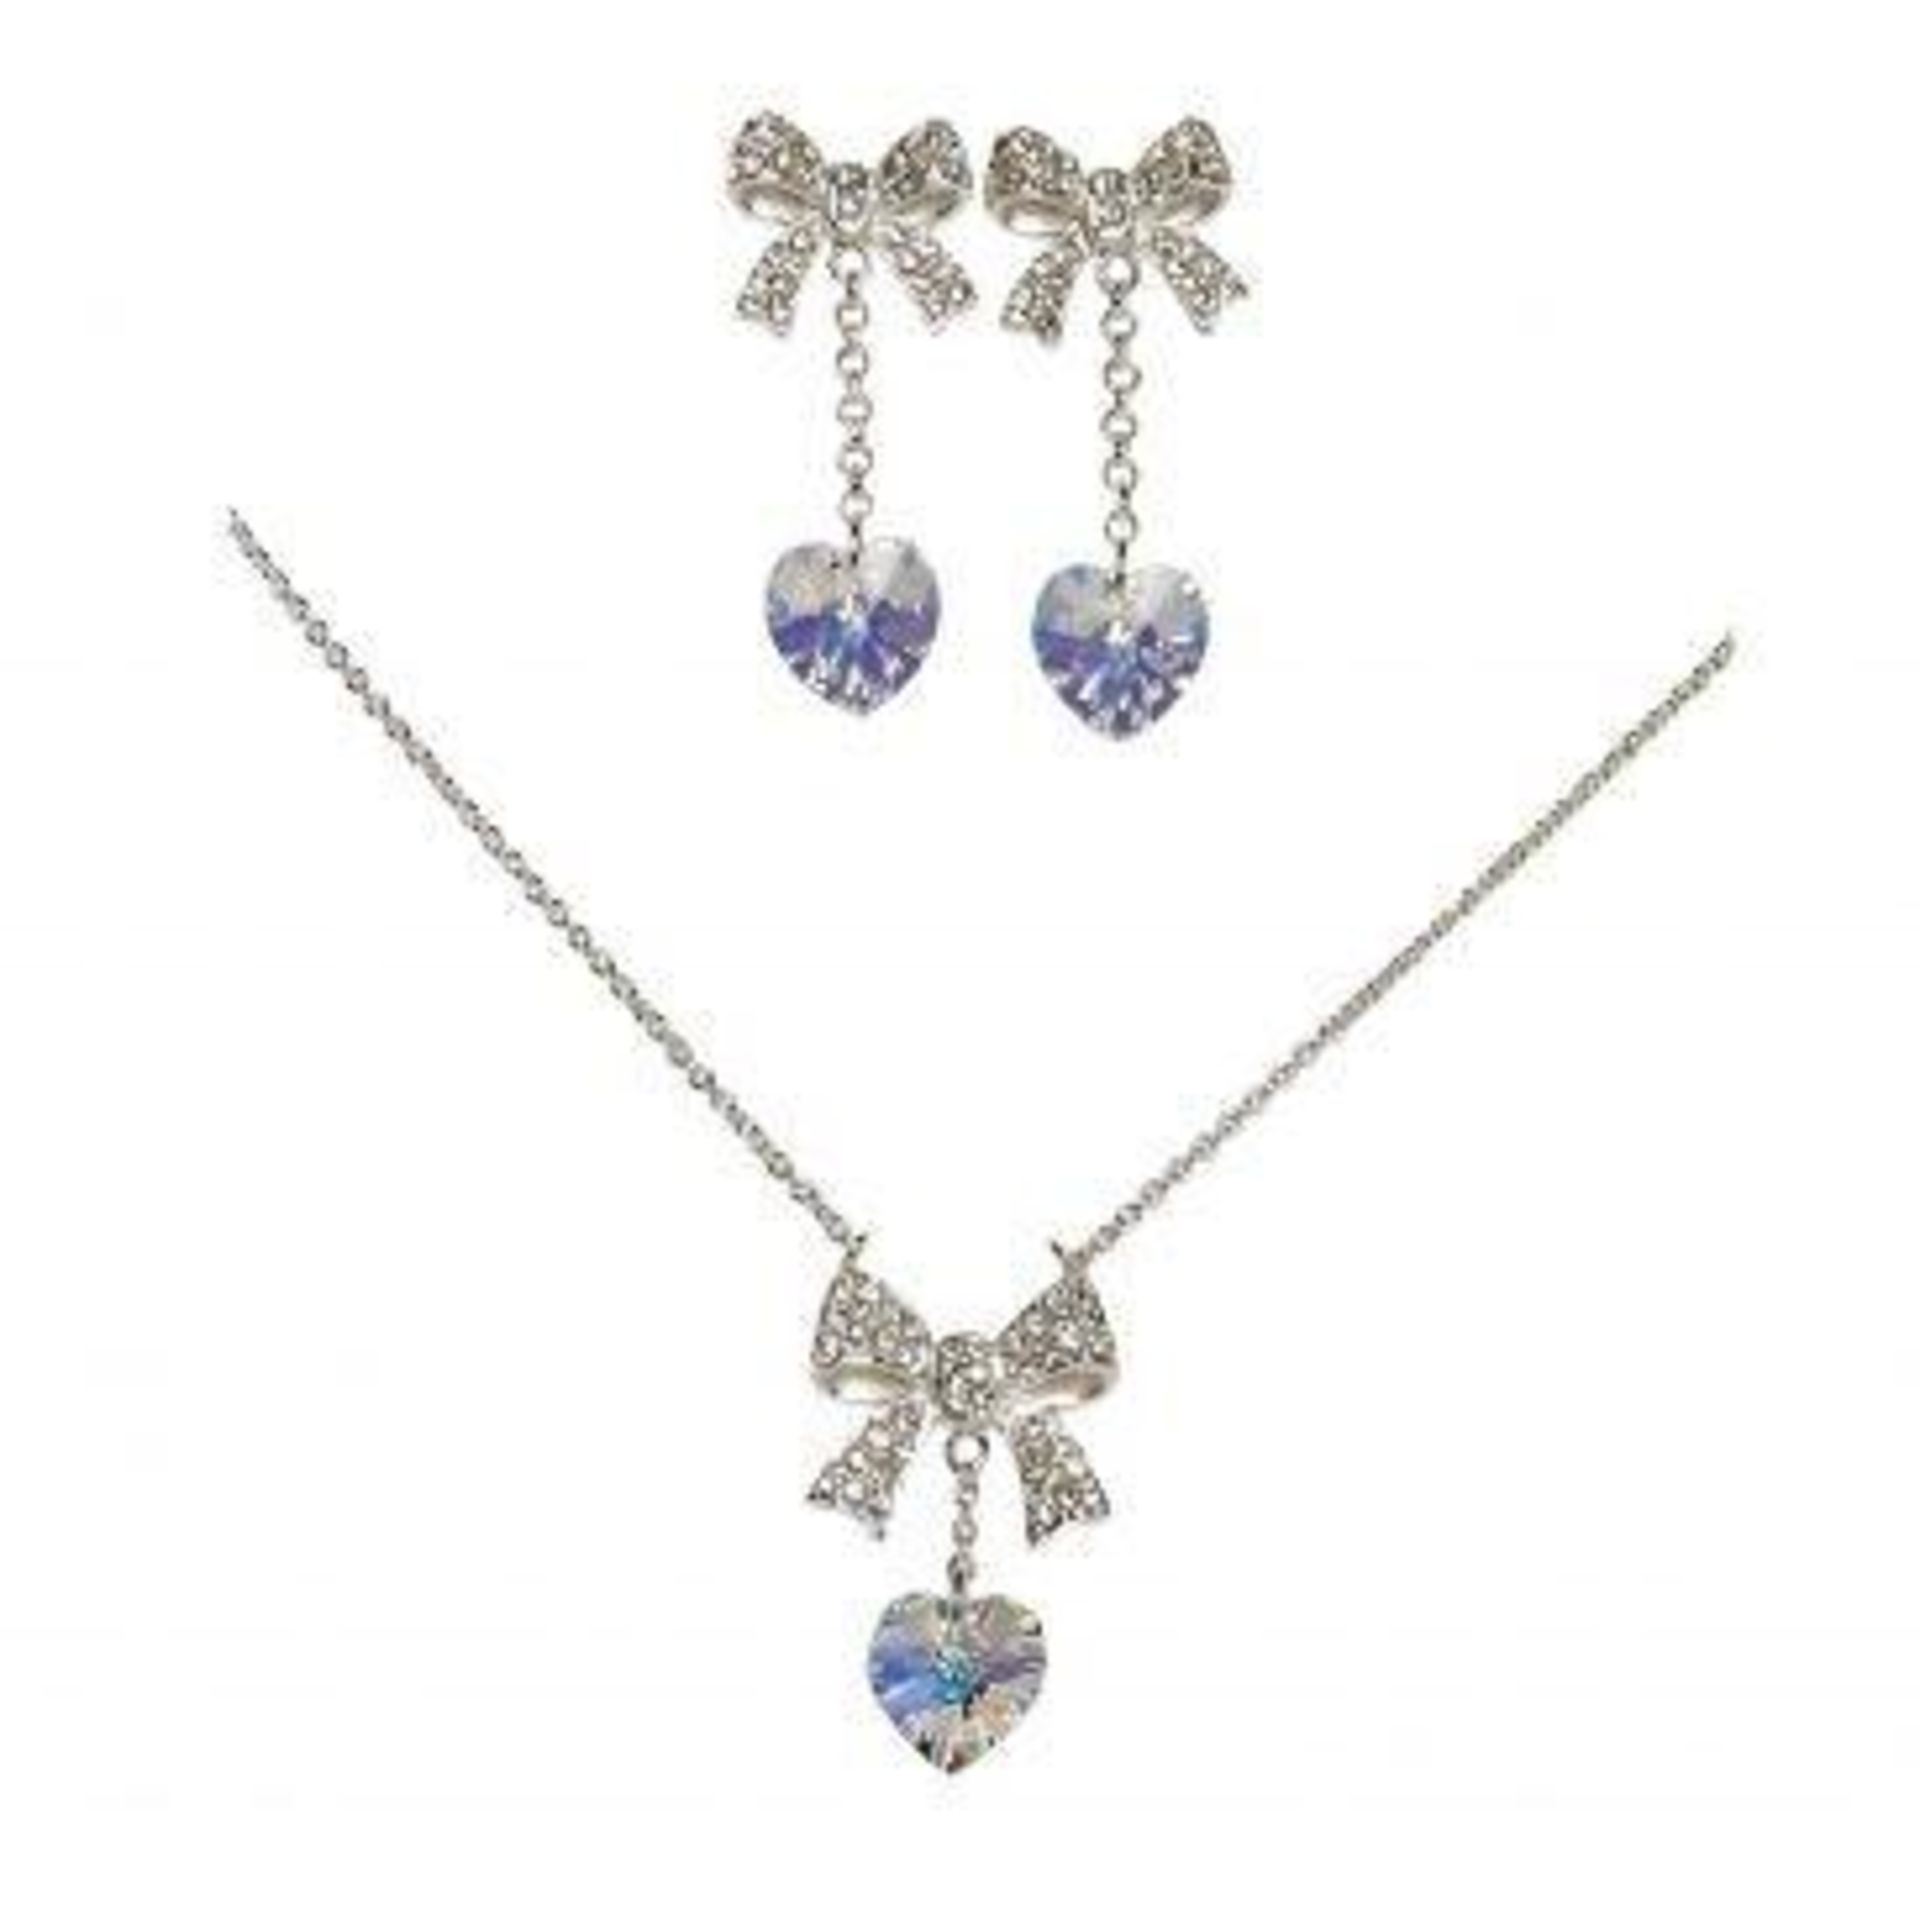 10 x HEART PENDANT AND EARRING SETS By ICE London - EGJ-9900 - Silver-tone Curb Chain Adorned With - Image 2 of 2